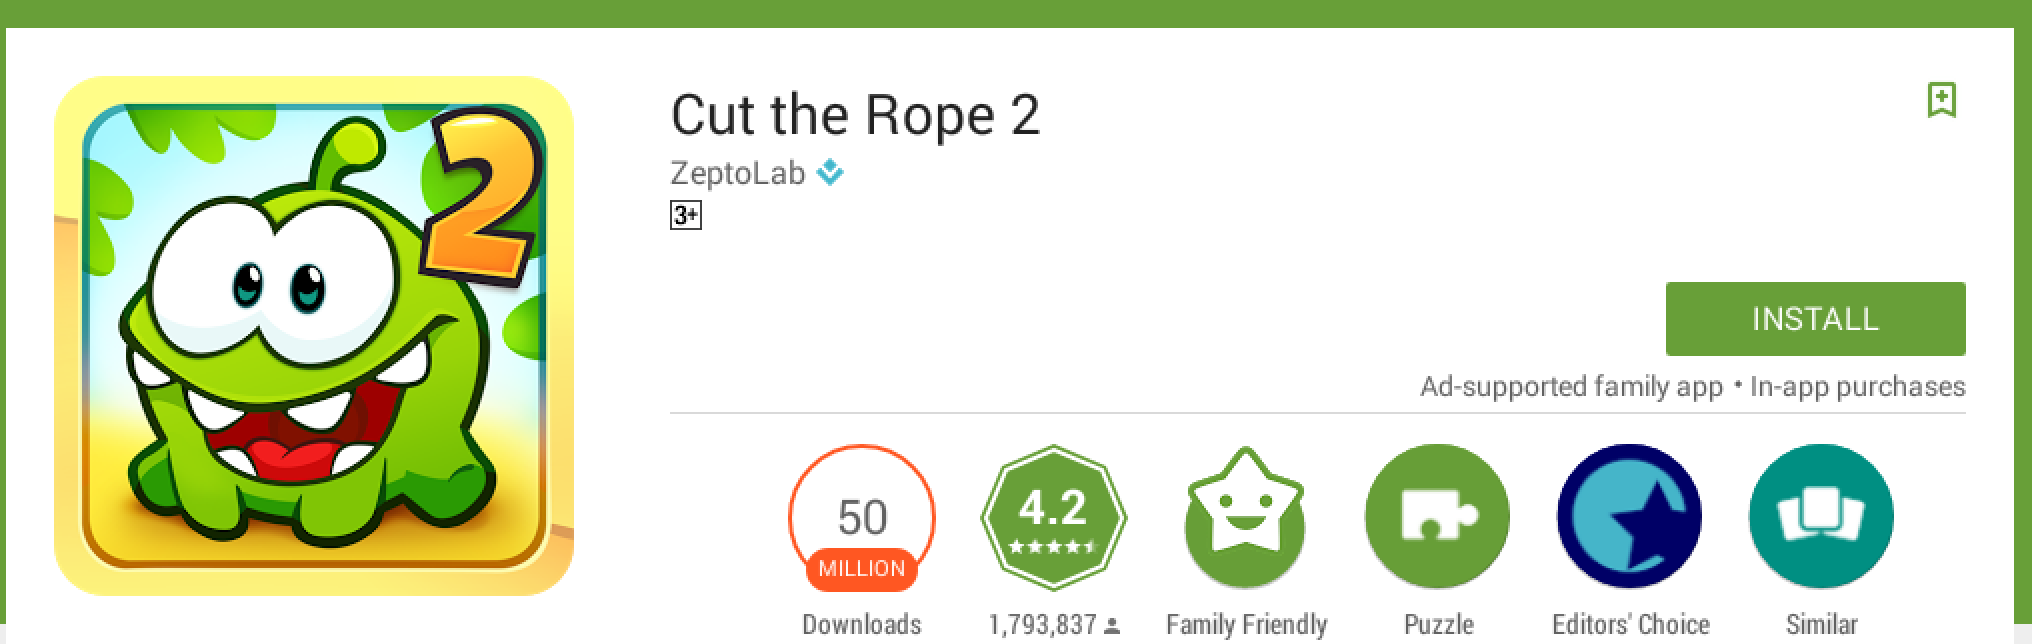 install cut the rope 2 button